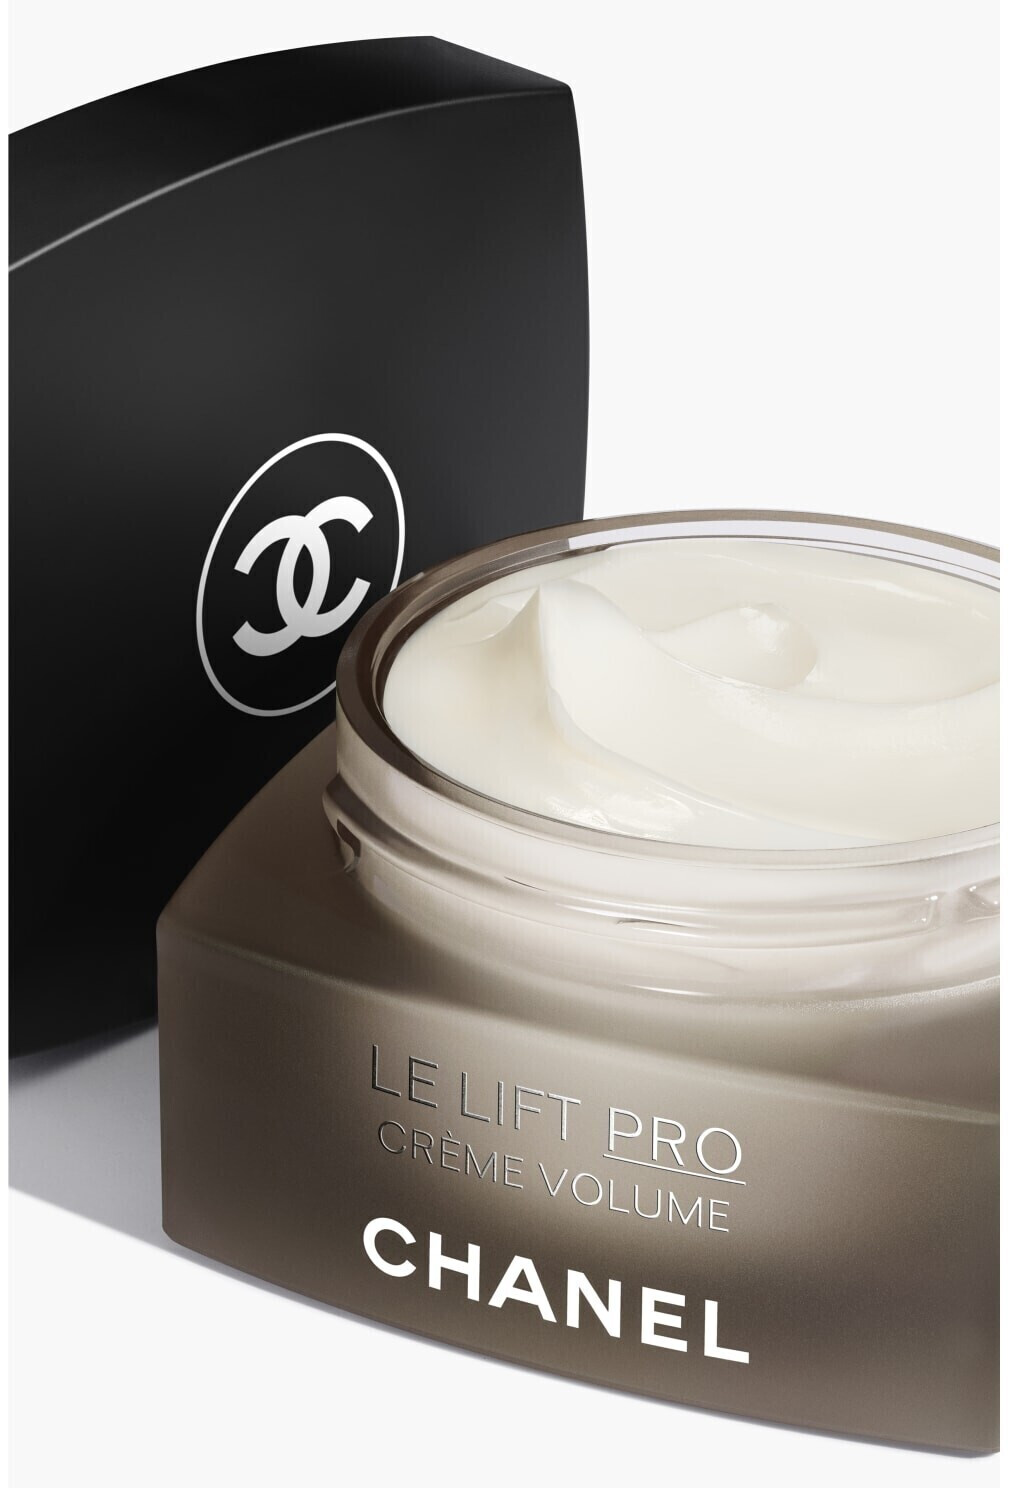 Buy Chanel Le Lift Pro Crème Volume (50g) from £73.39 (Today